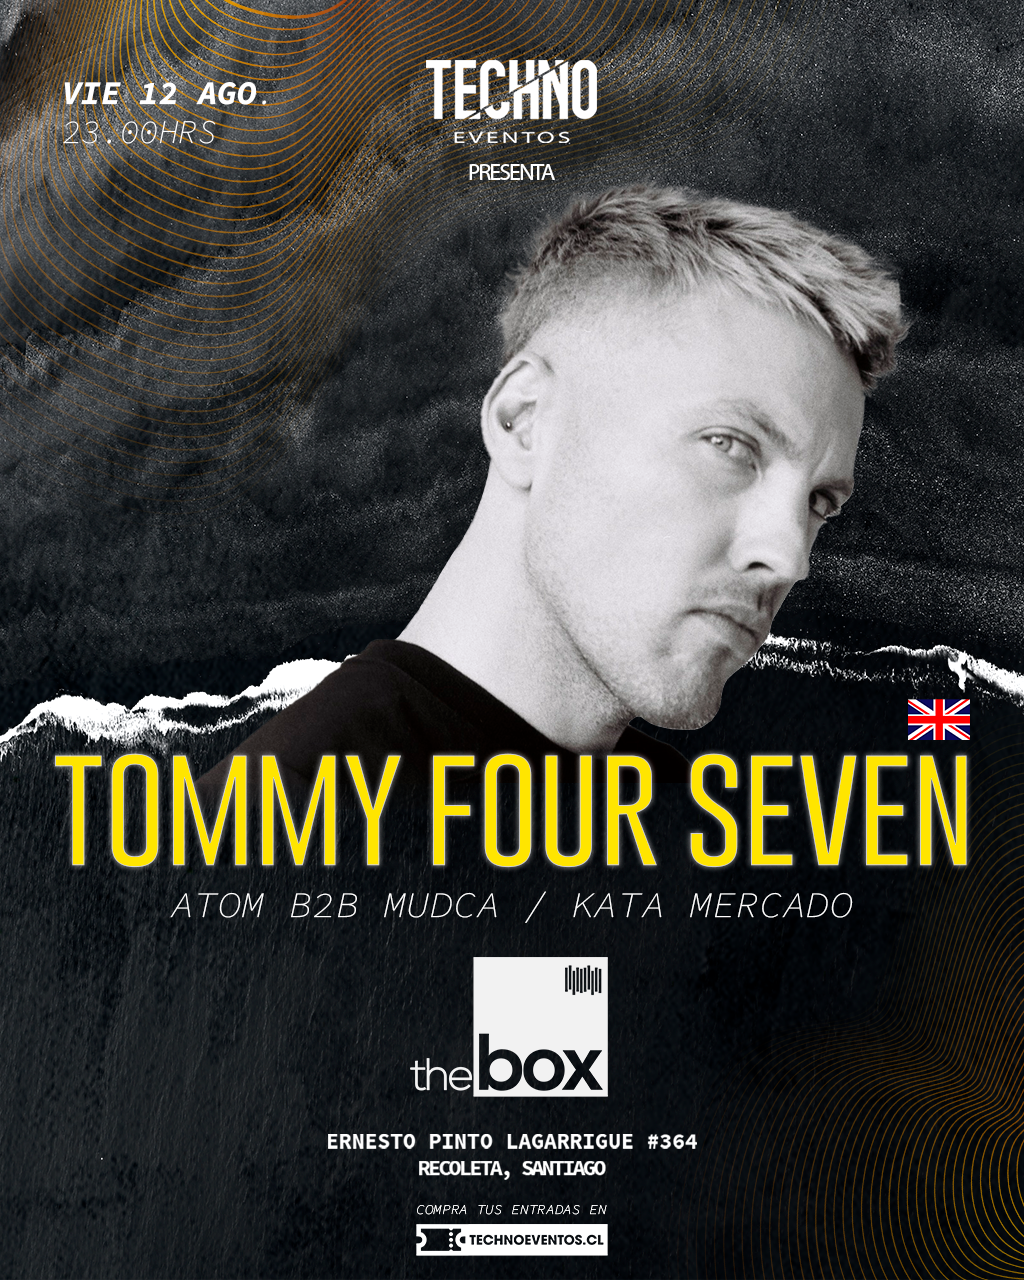 TOMMY FOUR SEVEN | VIE.12.AGO (THE BOX)